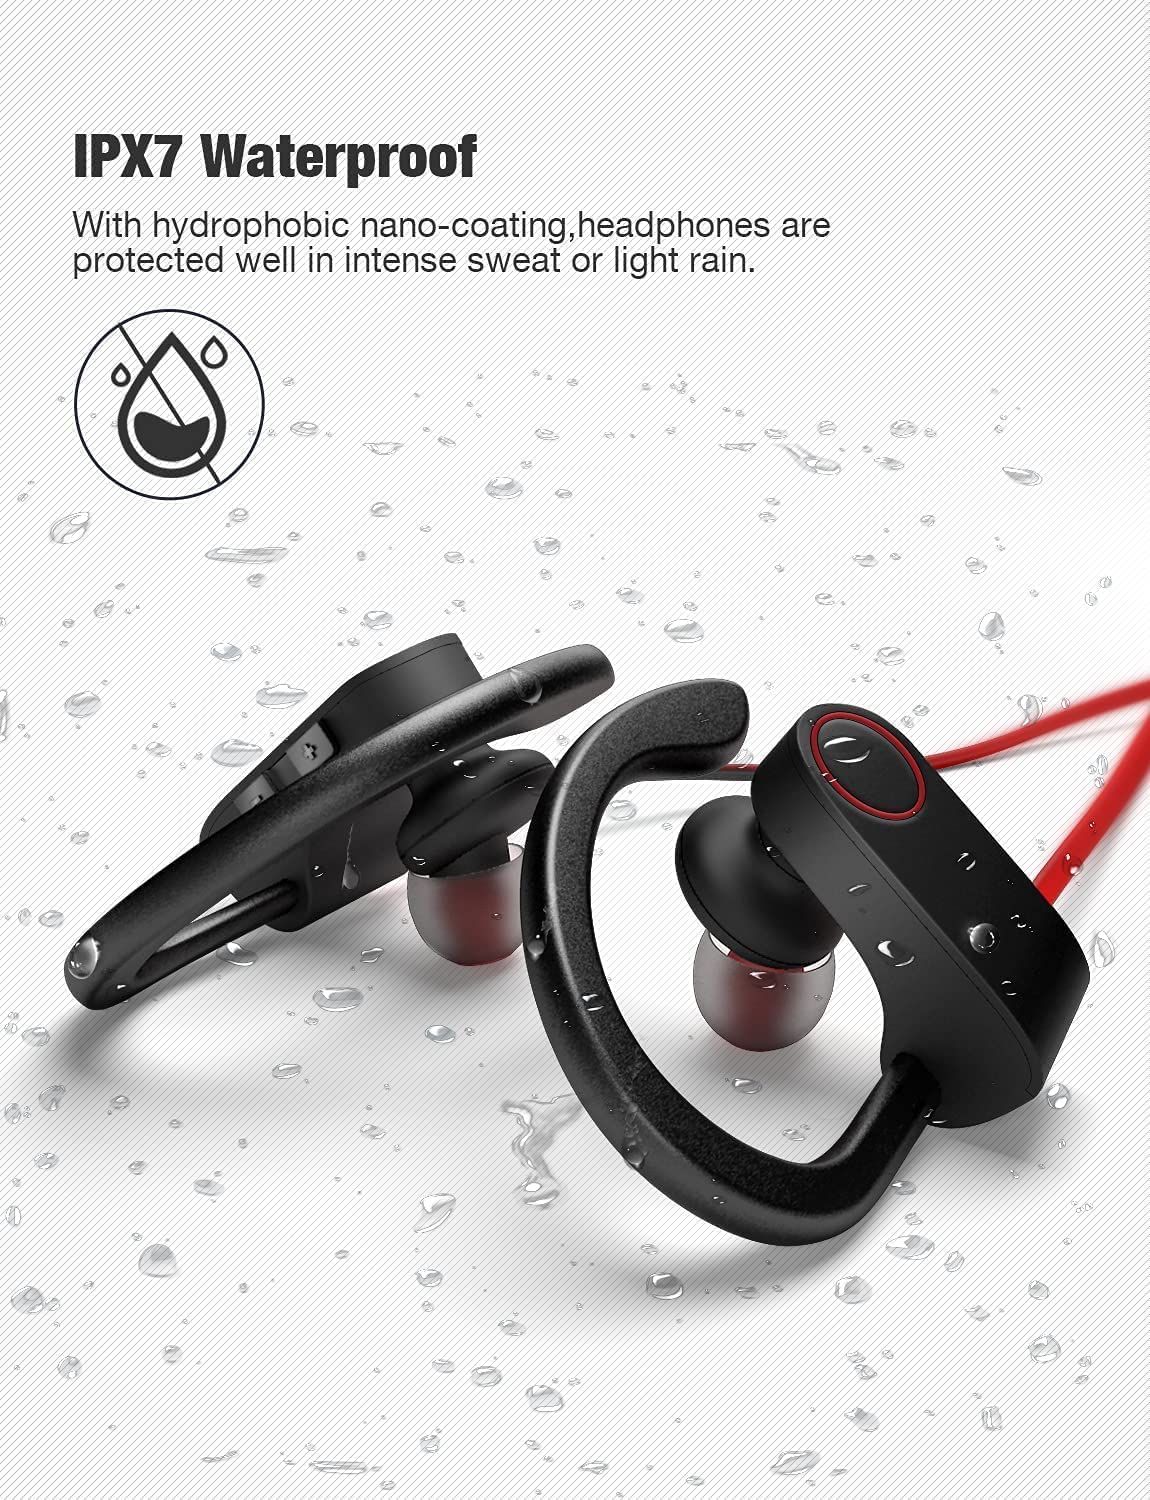 Otium Bluetooth Headphones, Wireless Earbuds IPX7 Waterproof Sports Earphones with Mic HD Stereo Sweatproof in-Ear Earbuds Gym Running Workout 15 Hour Battery Sounds Isolation Headsets Red